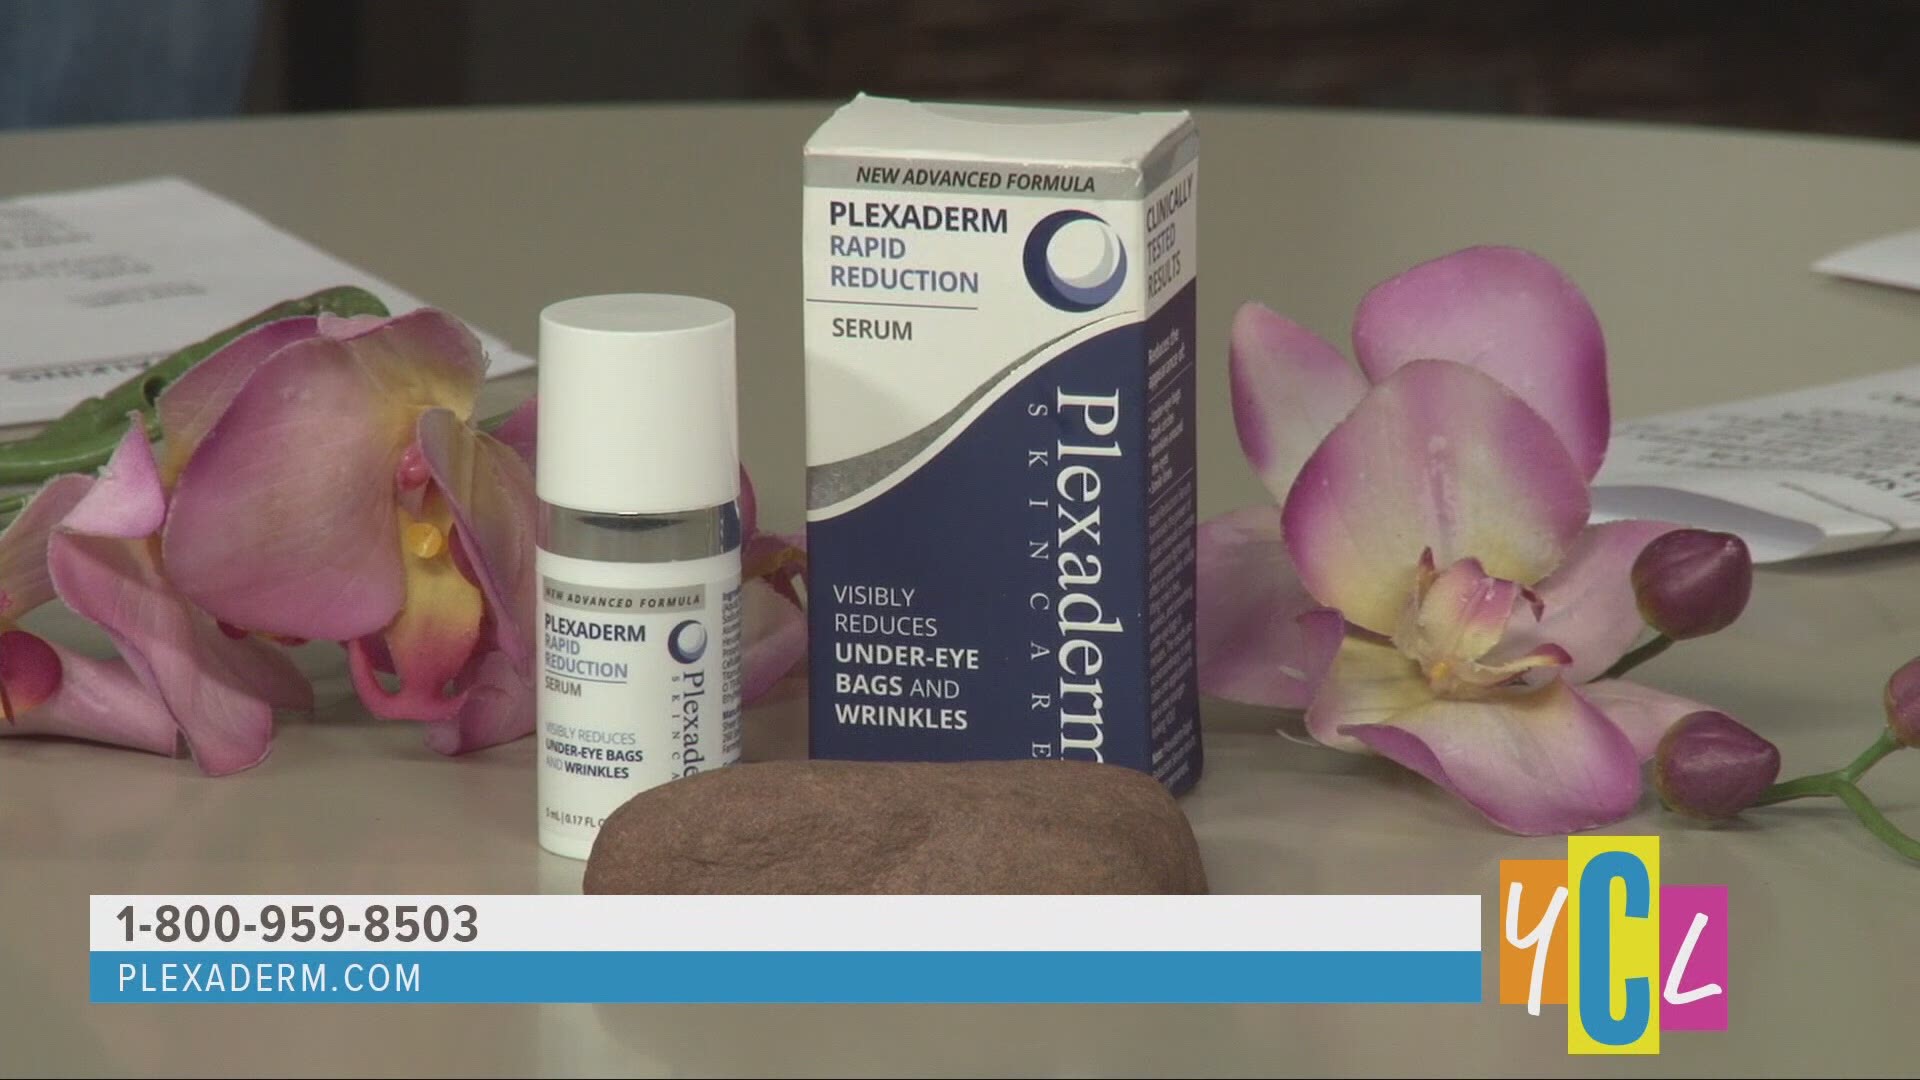 Get rid of those unwanted wrinkles, under eye bags, and dark circles in as little as five minutes. The following is a paid segment.